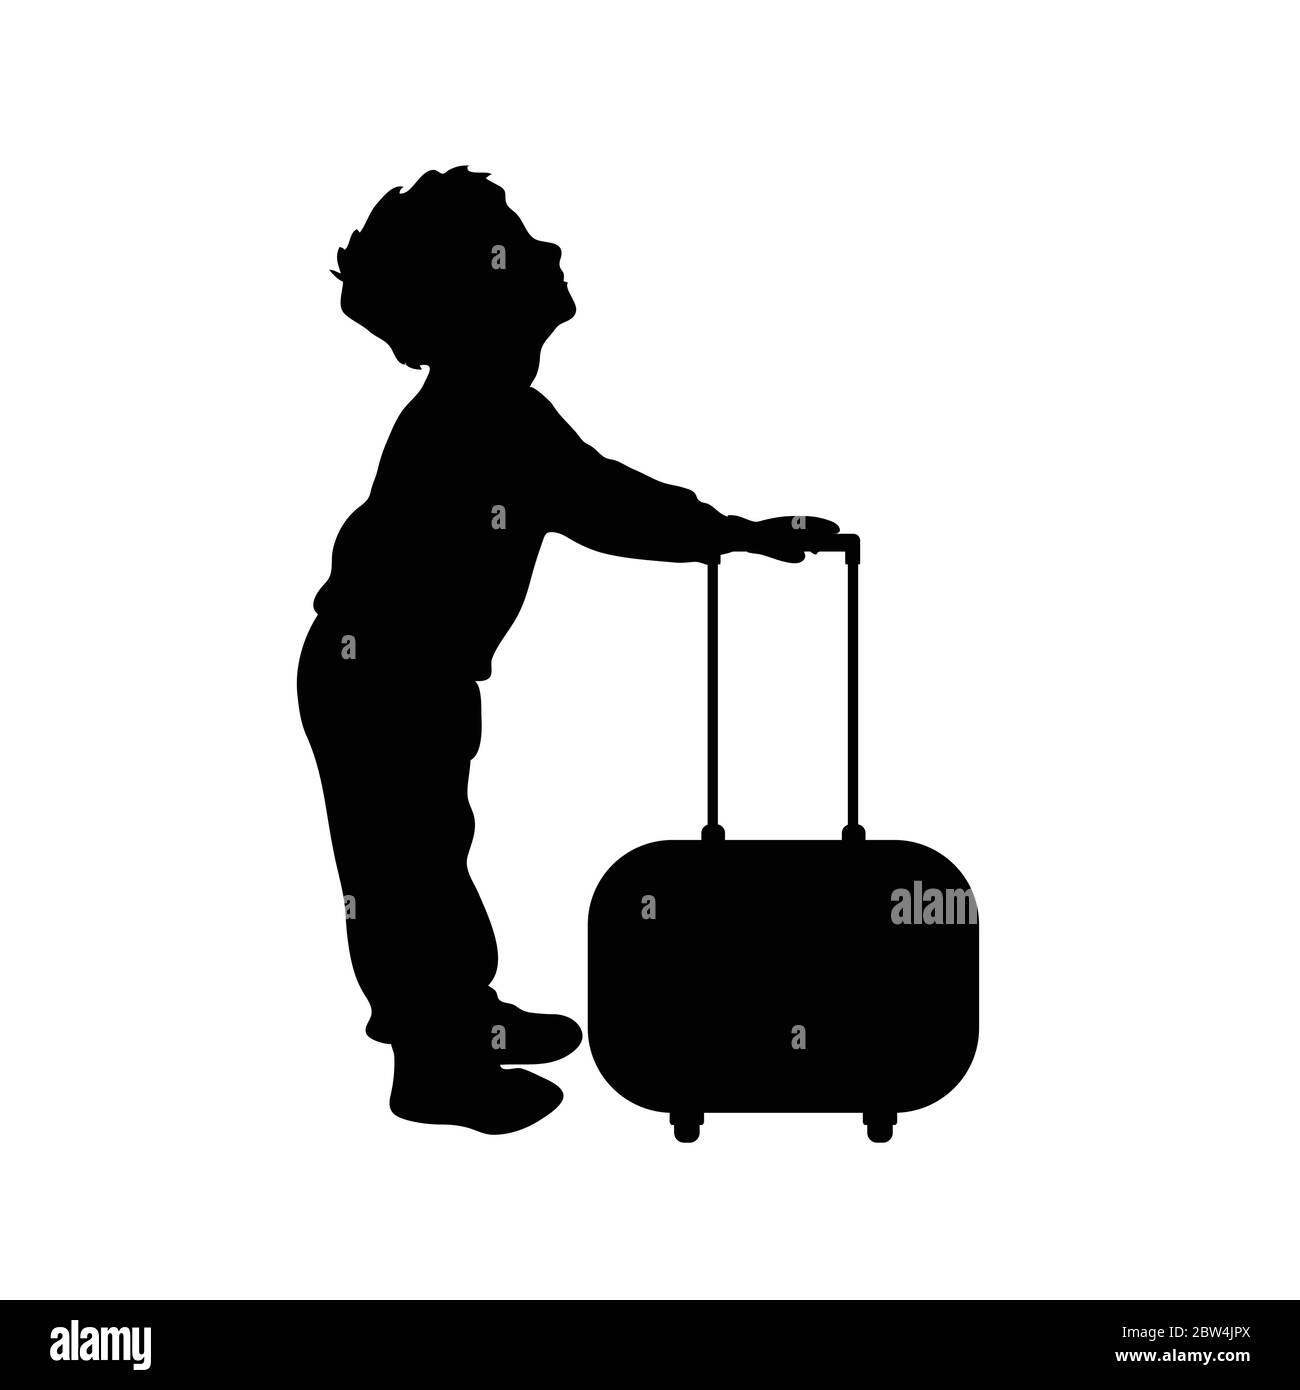 child boy silhouette cute with travel bag art illustration Stock Vector